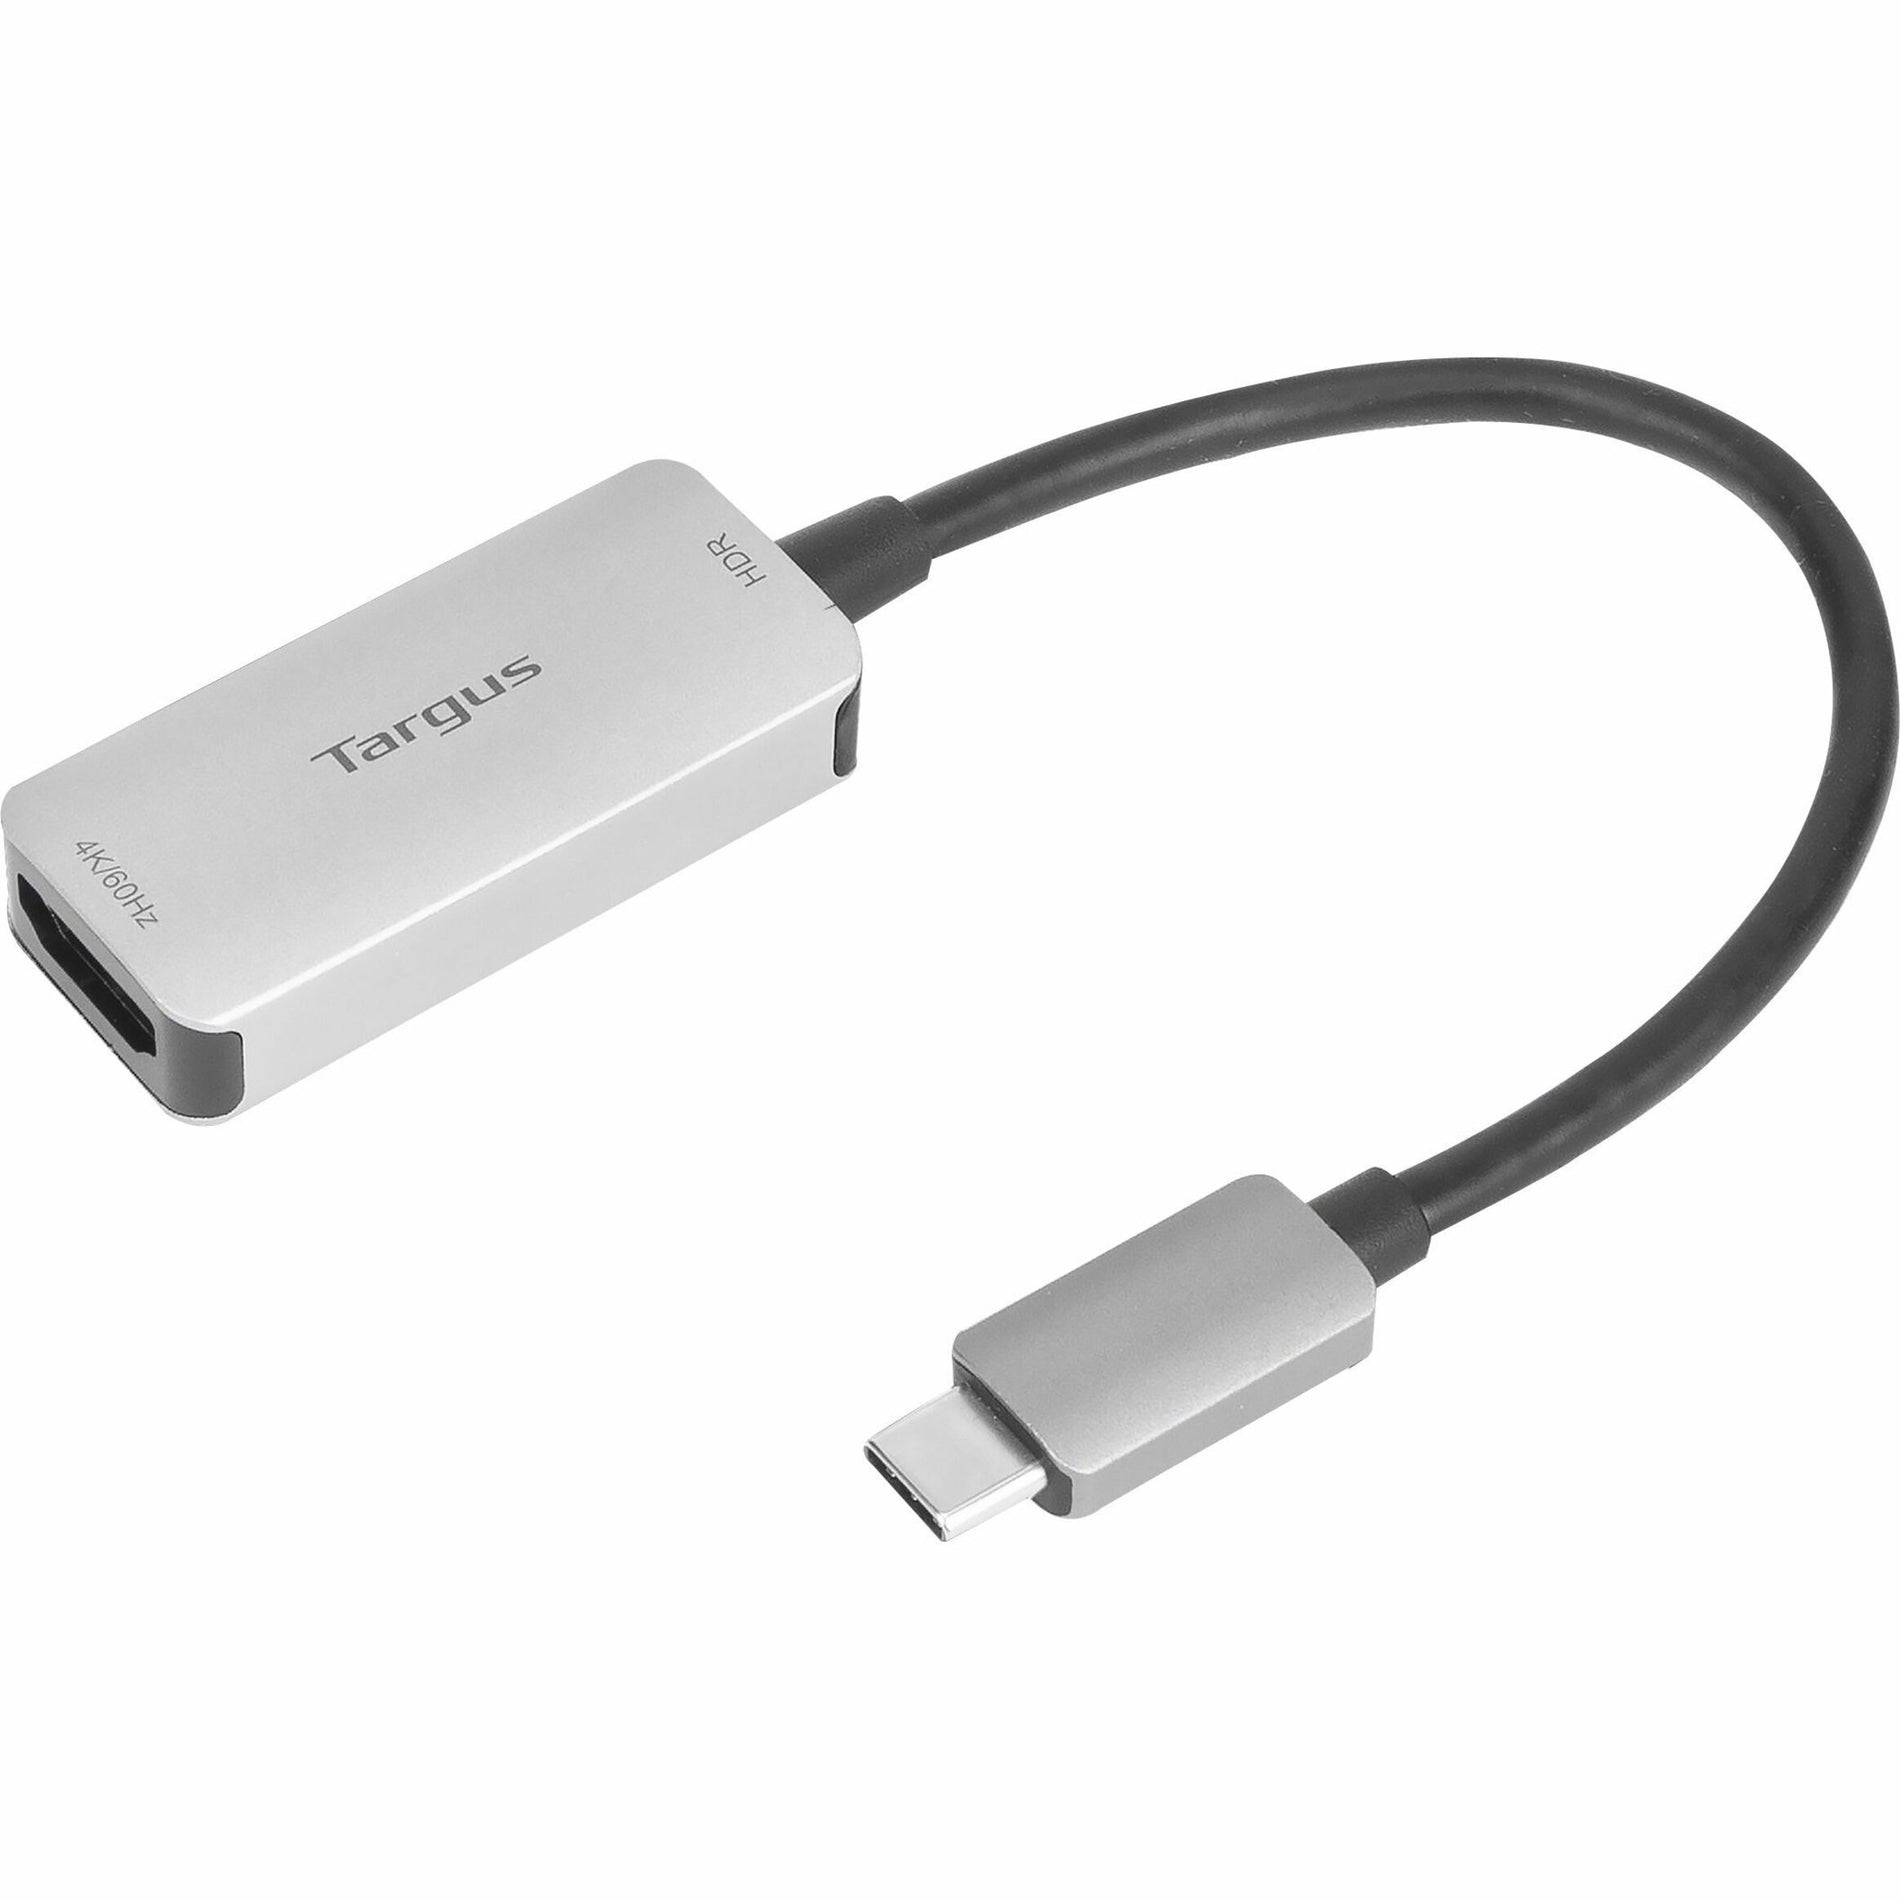 Targus ACA969GL USB-C to HDMI Adapter, 4K HDR Support